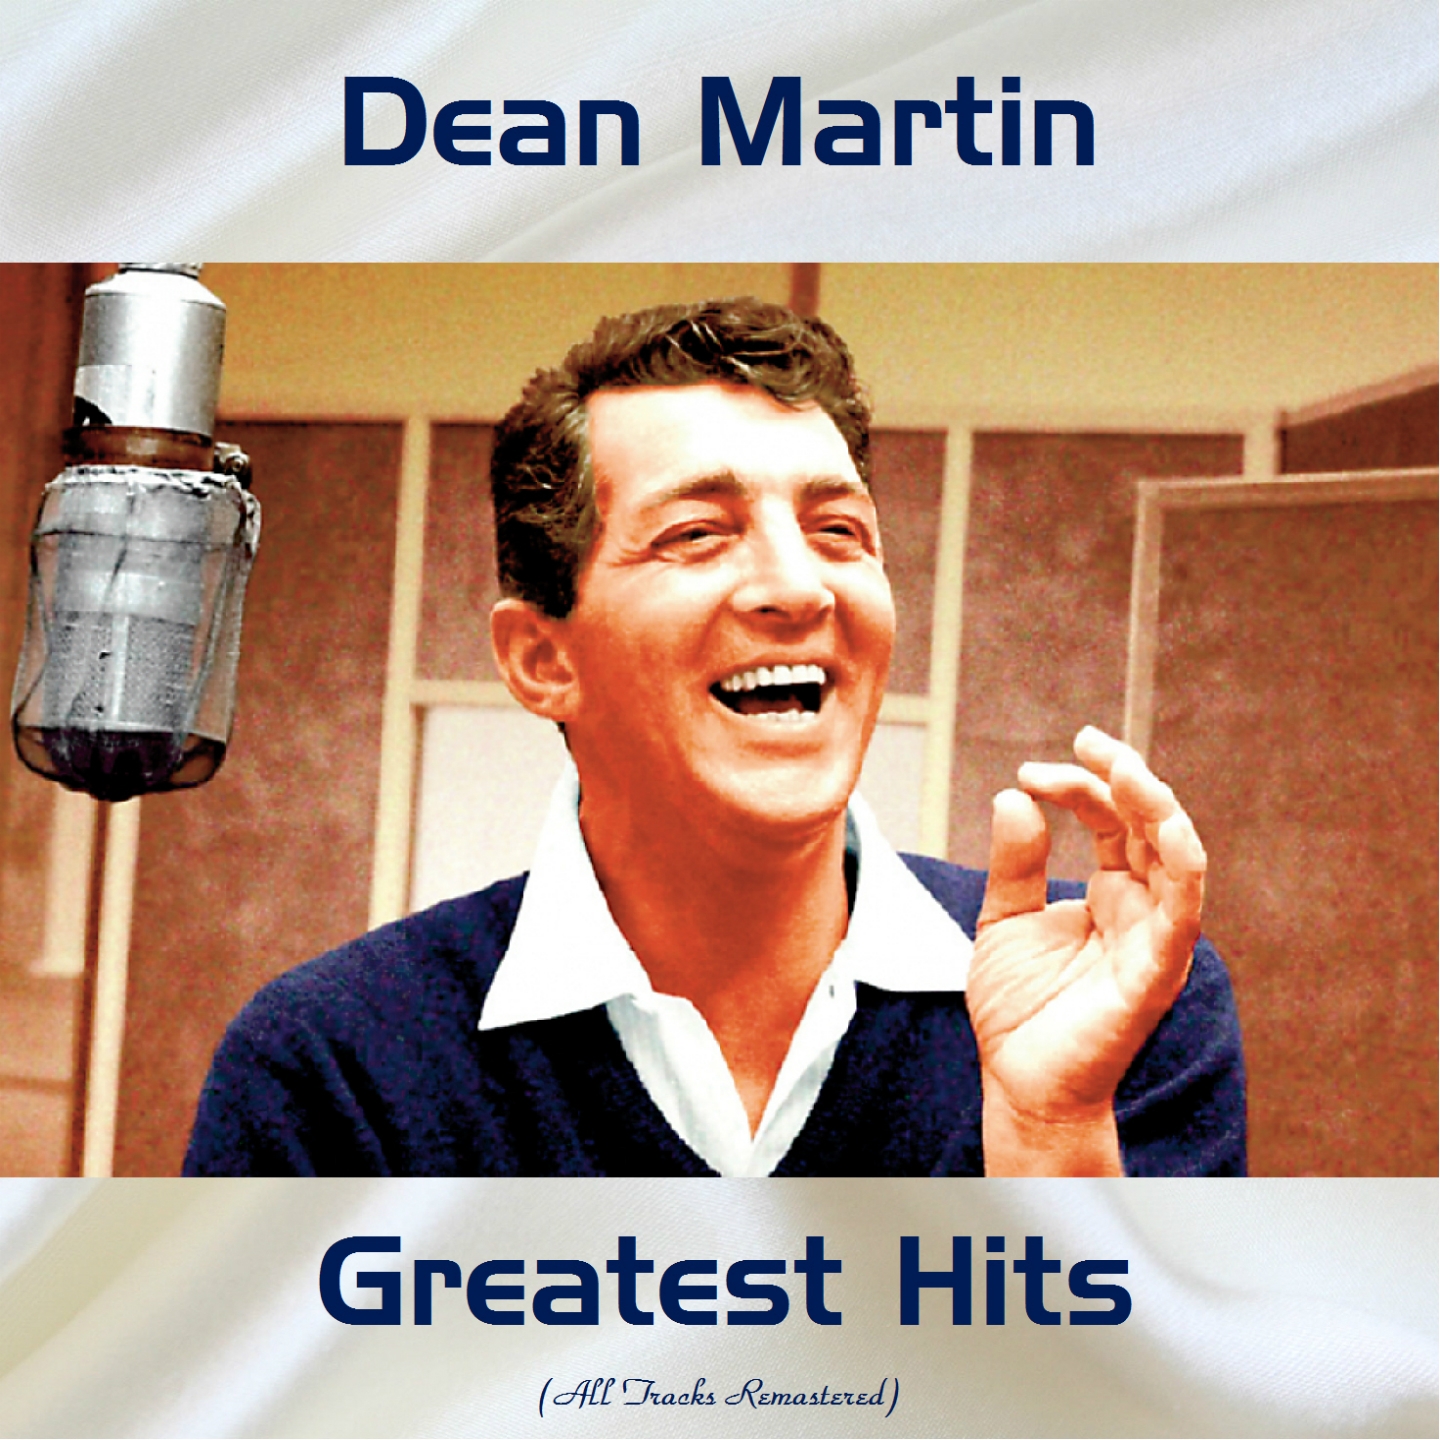 Dean Martin Greatest Hits (All Tracks Remastered)